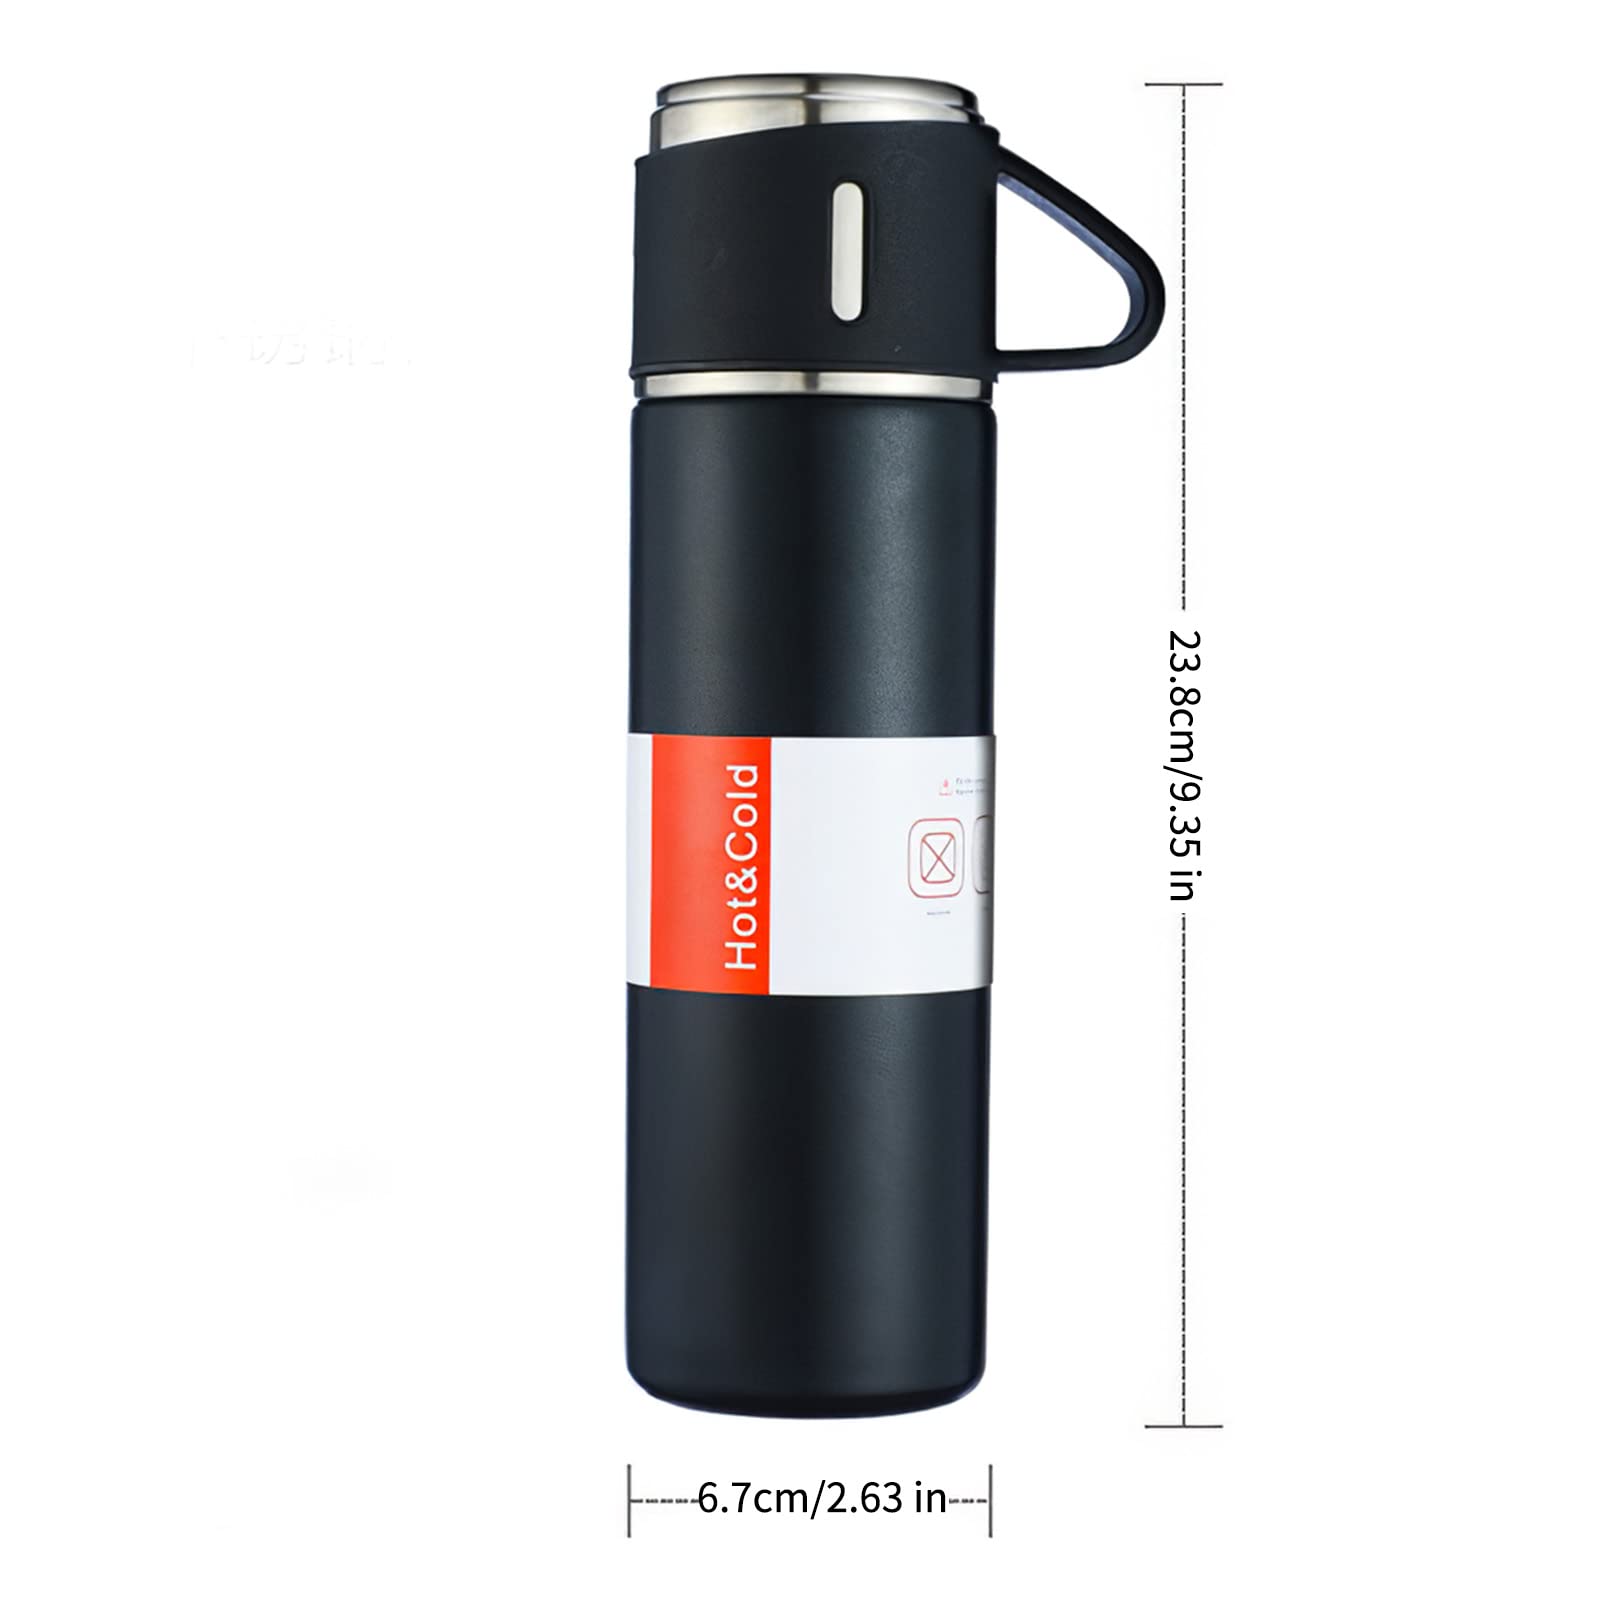 YUNYODA Vacuum Insulated Bottle, Stainless Steel Thermo 500ml /16.9oz/Vacuum Insulated Wide Mouth Bottle with Cup for Coffee Hot drink and Cold Drink Water Flask.